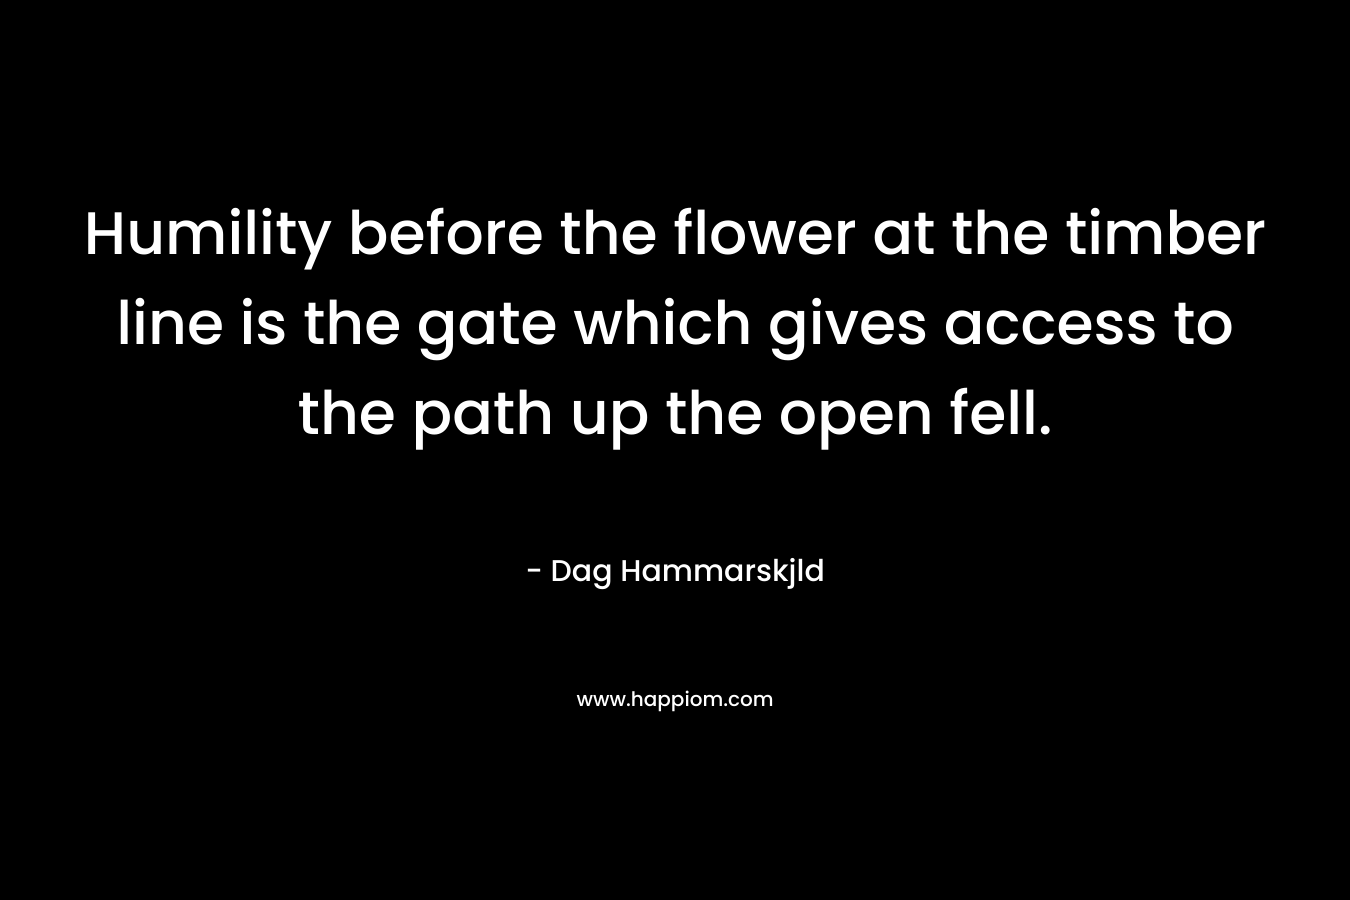 Humility before the flower at the timber line is the gate which gives access to the path up the open fell. – Dag Hammarskjld